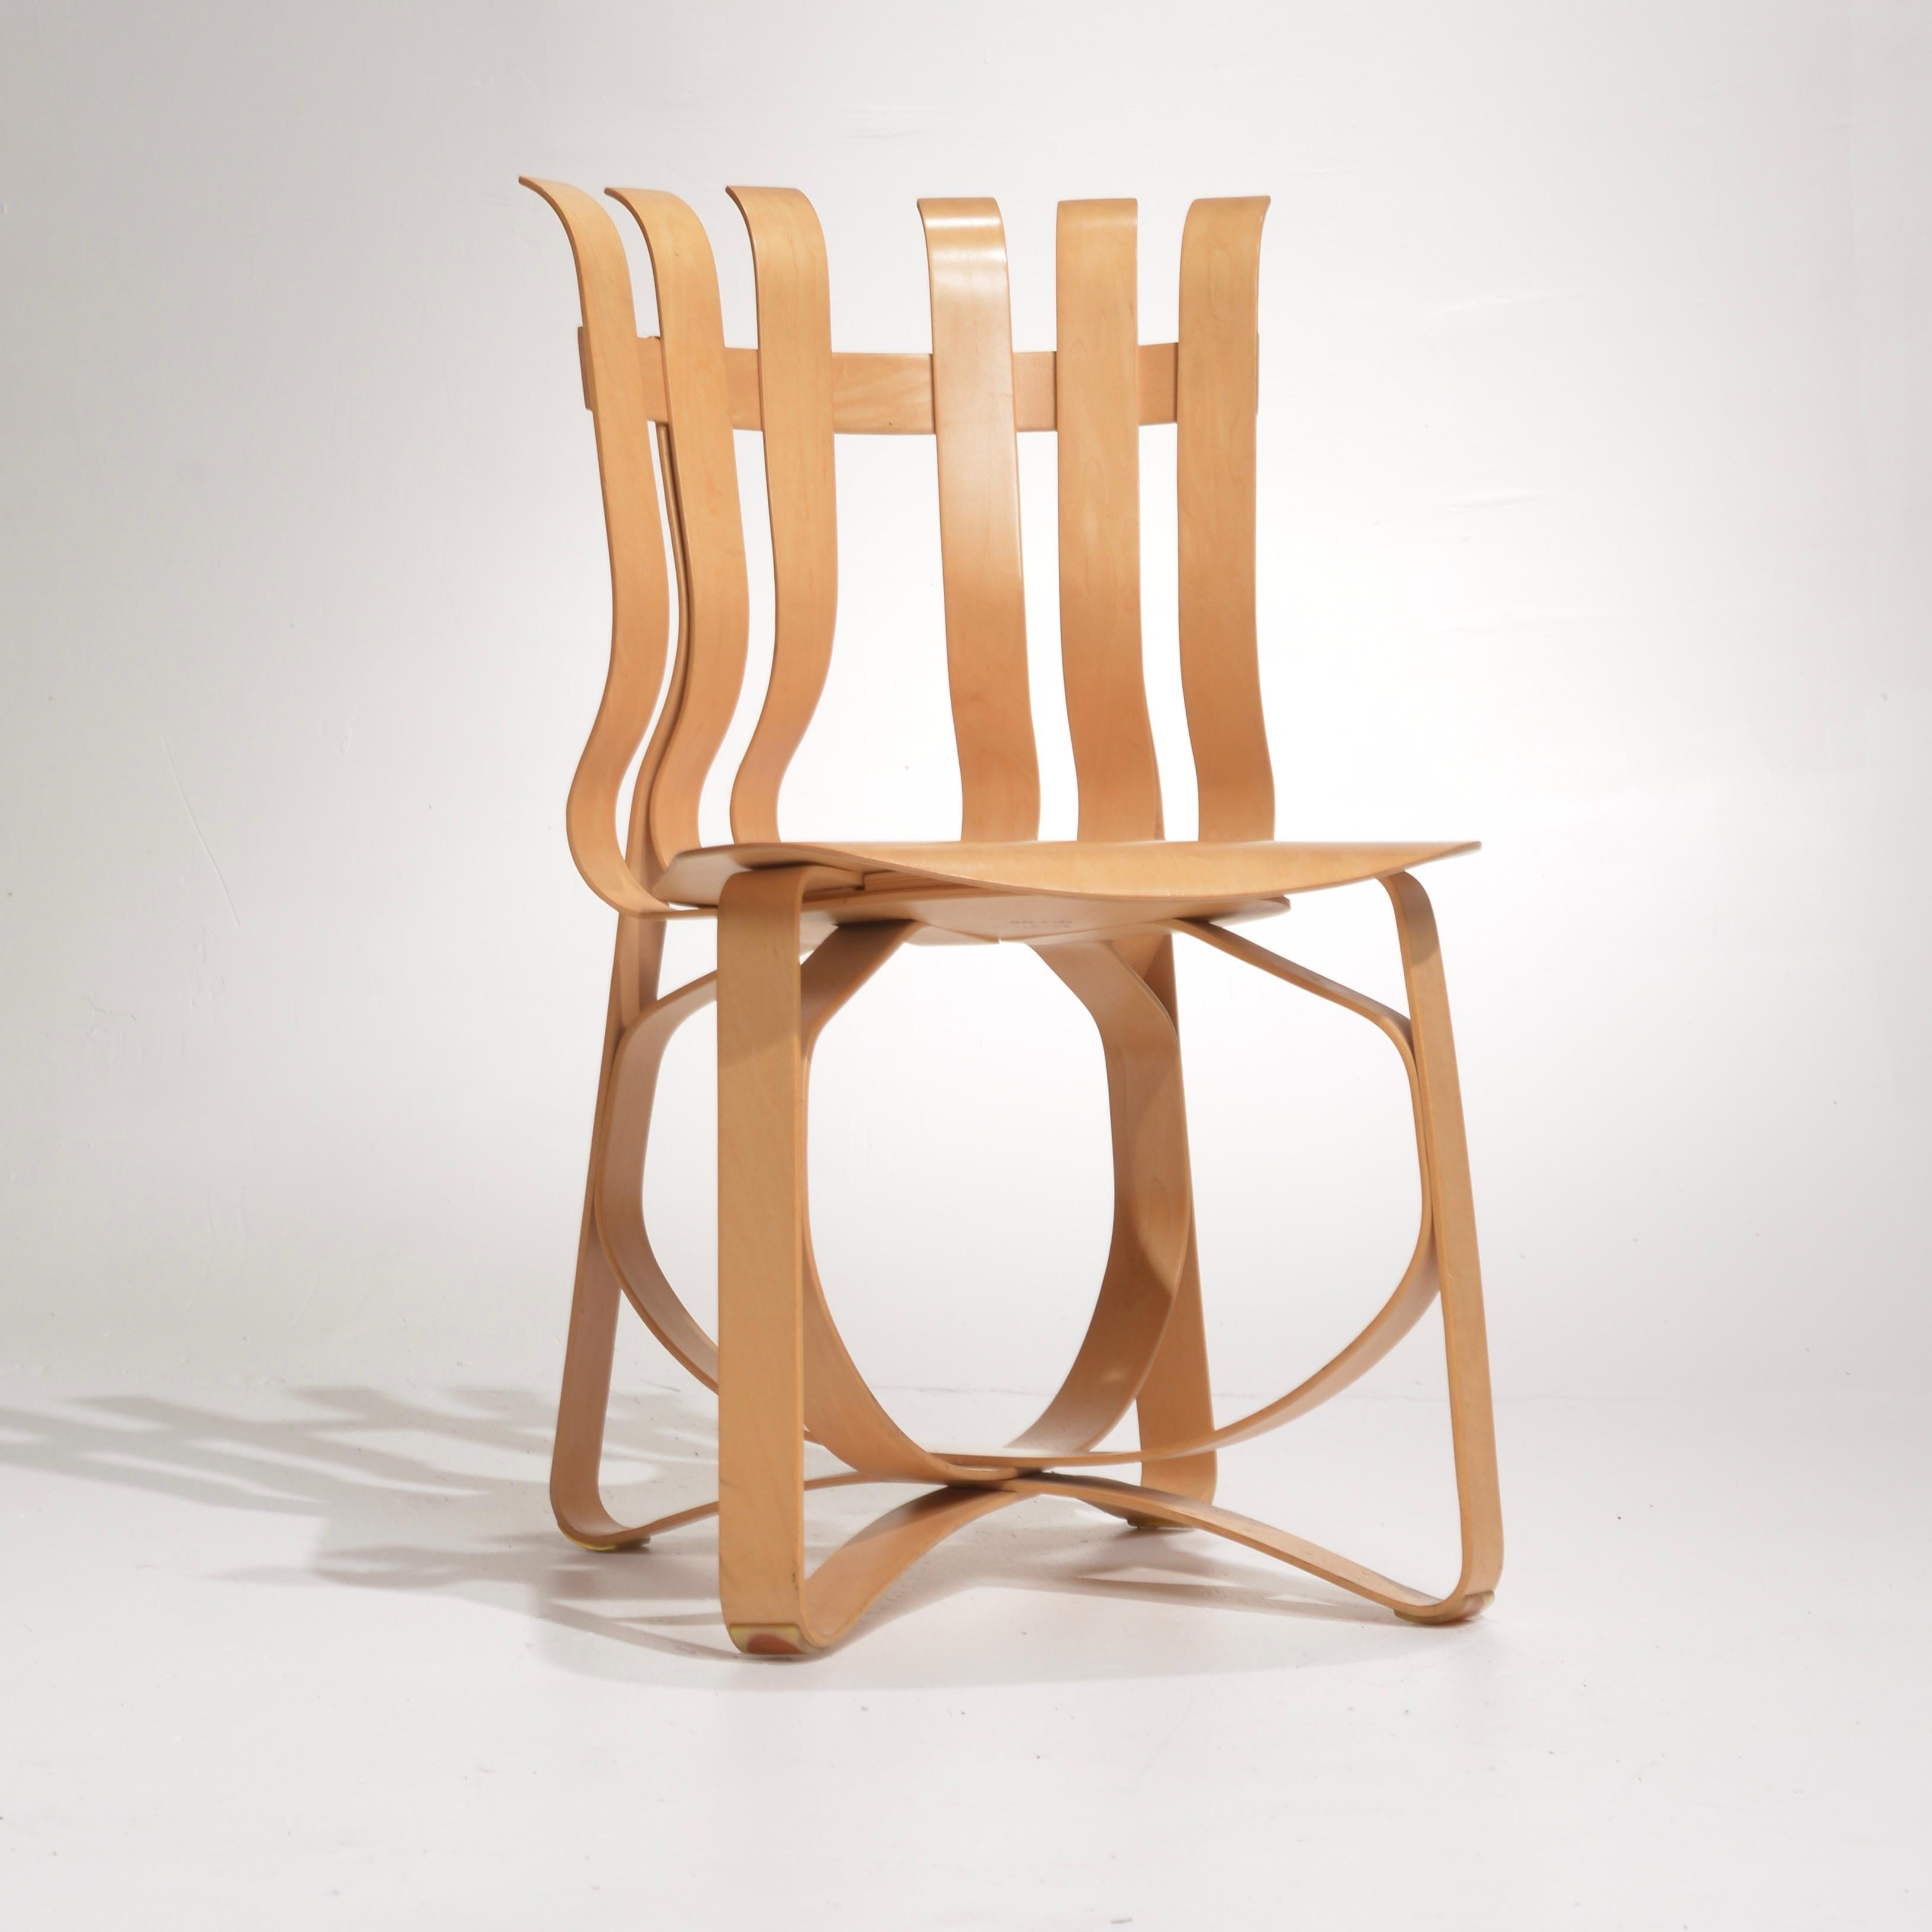 Inspired by the apple crates he played with as a child, Frank Gehry created a collection of bentwood furniture. Using ribbon-like design he transcended the conventions of style in the modernistic way of challenging form from function. Constructed of